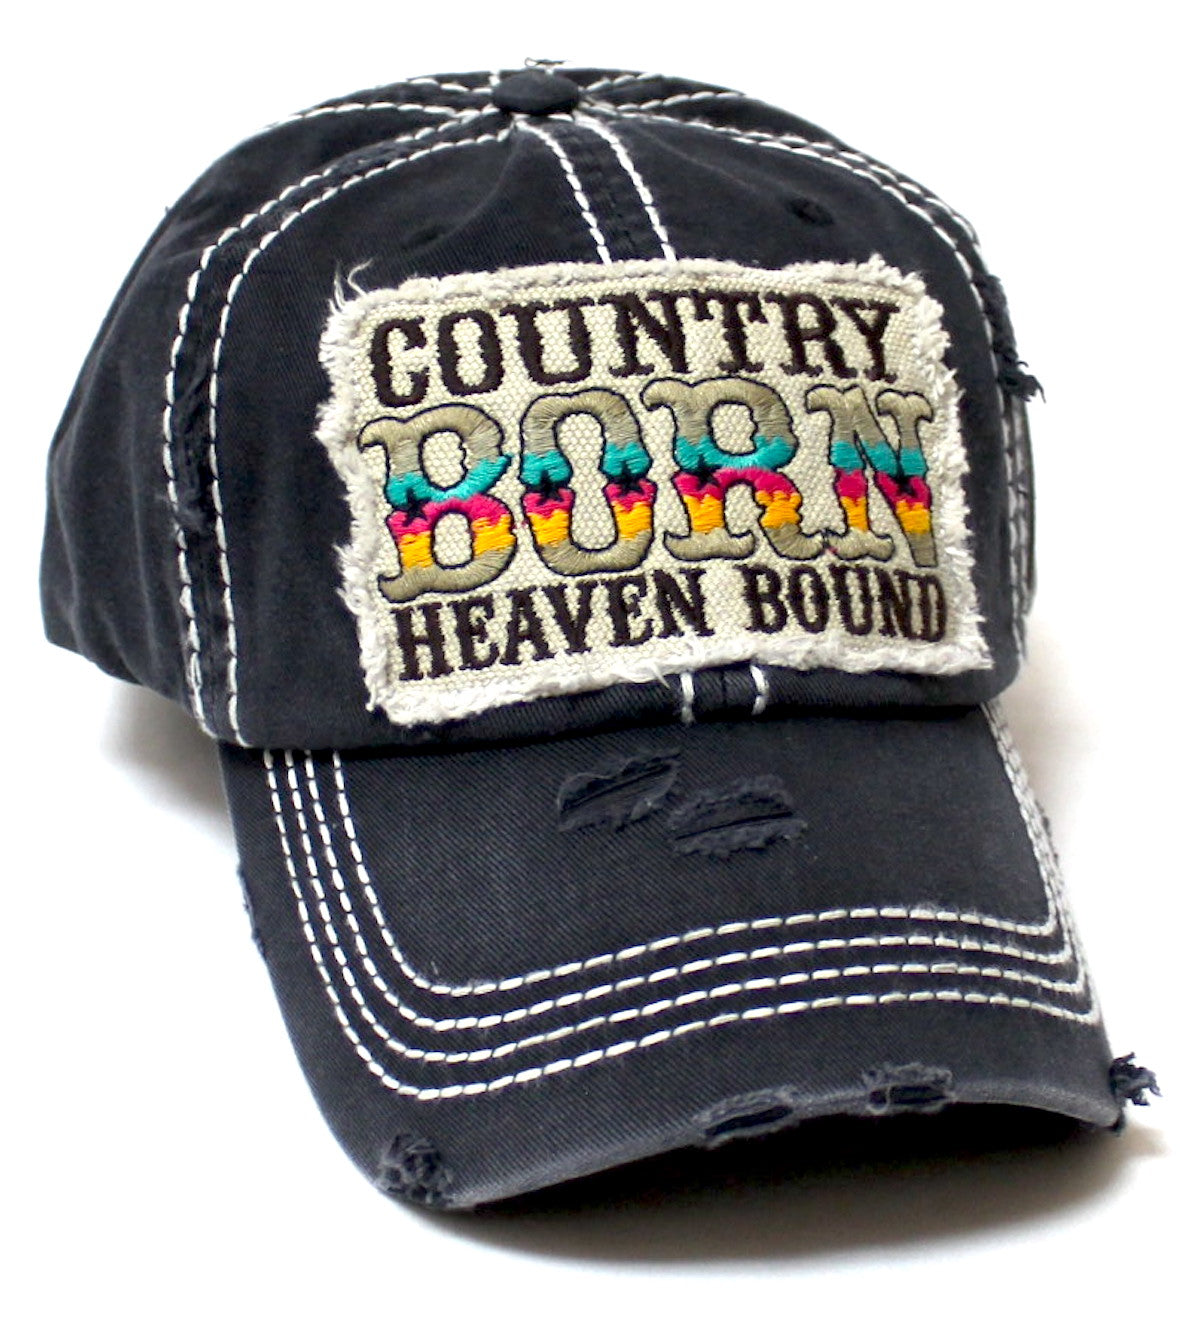 Women's Distressed Ballcap Country Born Heaven Bound Western Themed Patch Embroidery Hat, Black